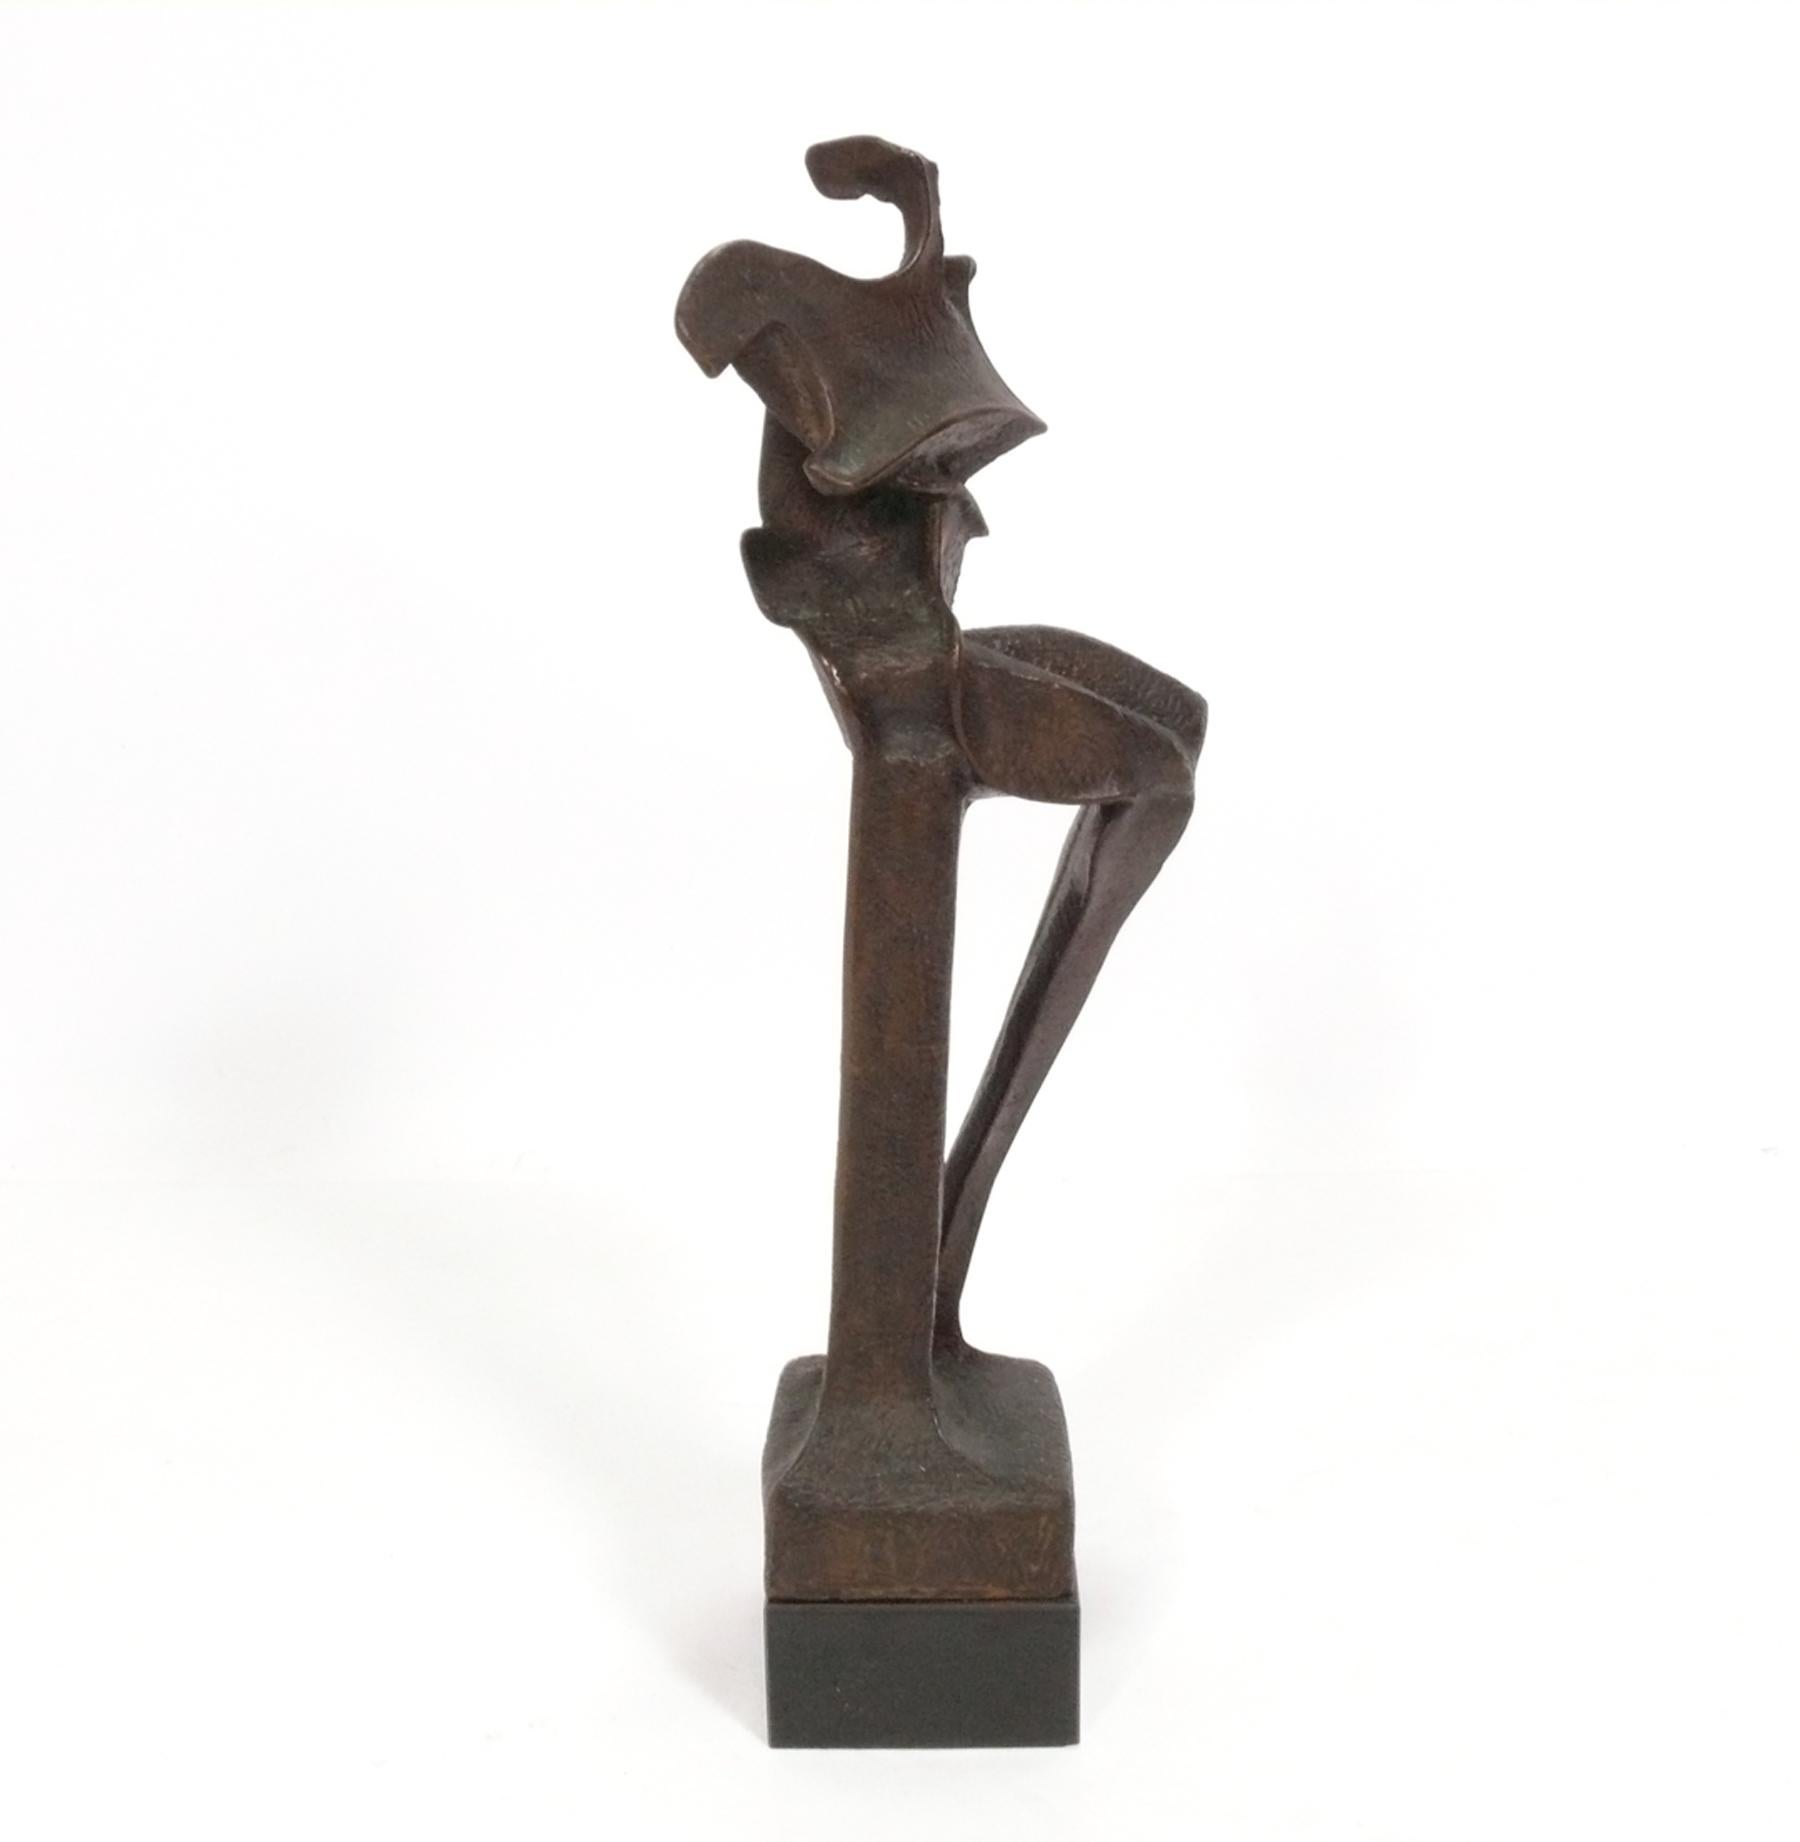 Large abstract bronze sculpture by Carol Harrison, American, circa 1970s. Retains it's warm original patina. It measures an impressive 18